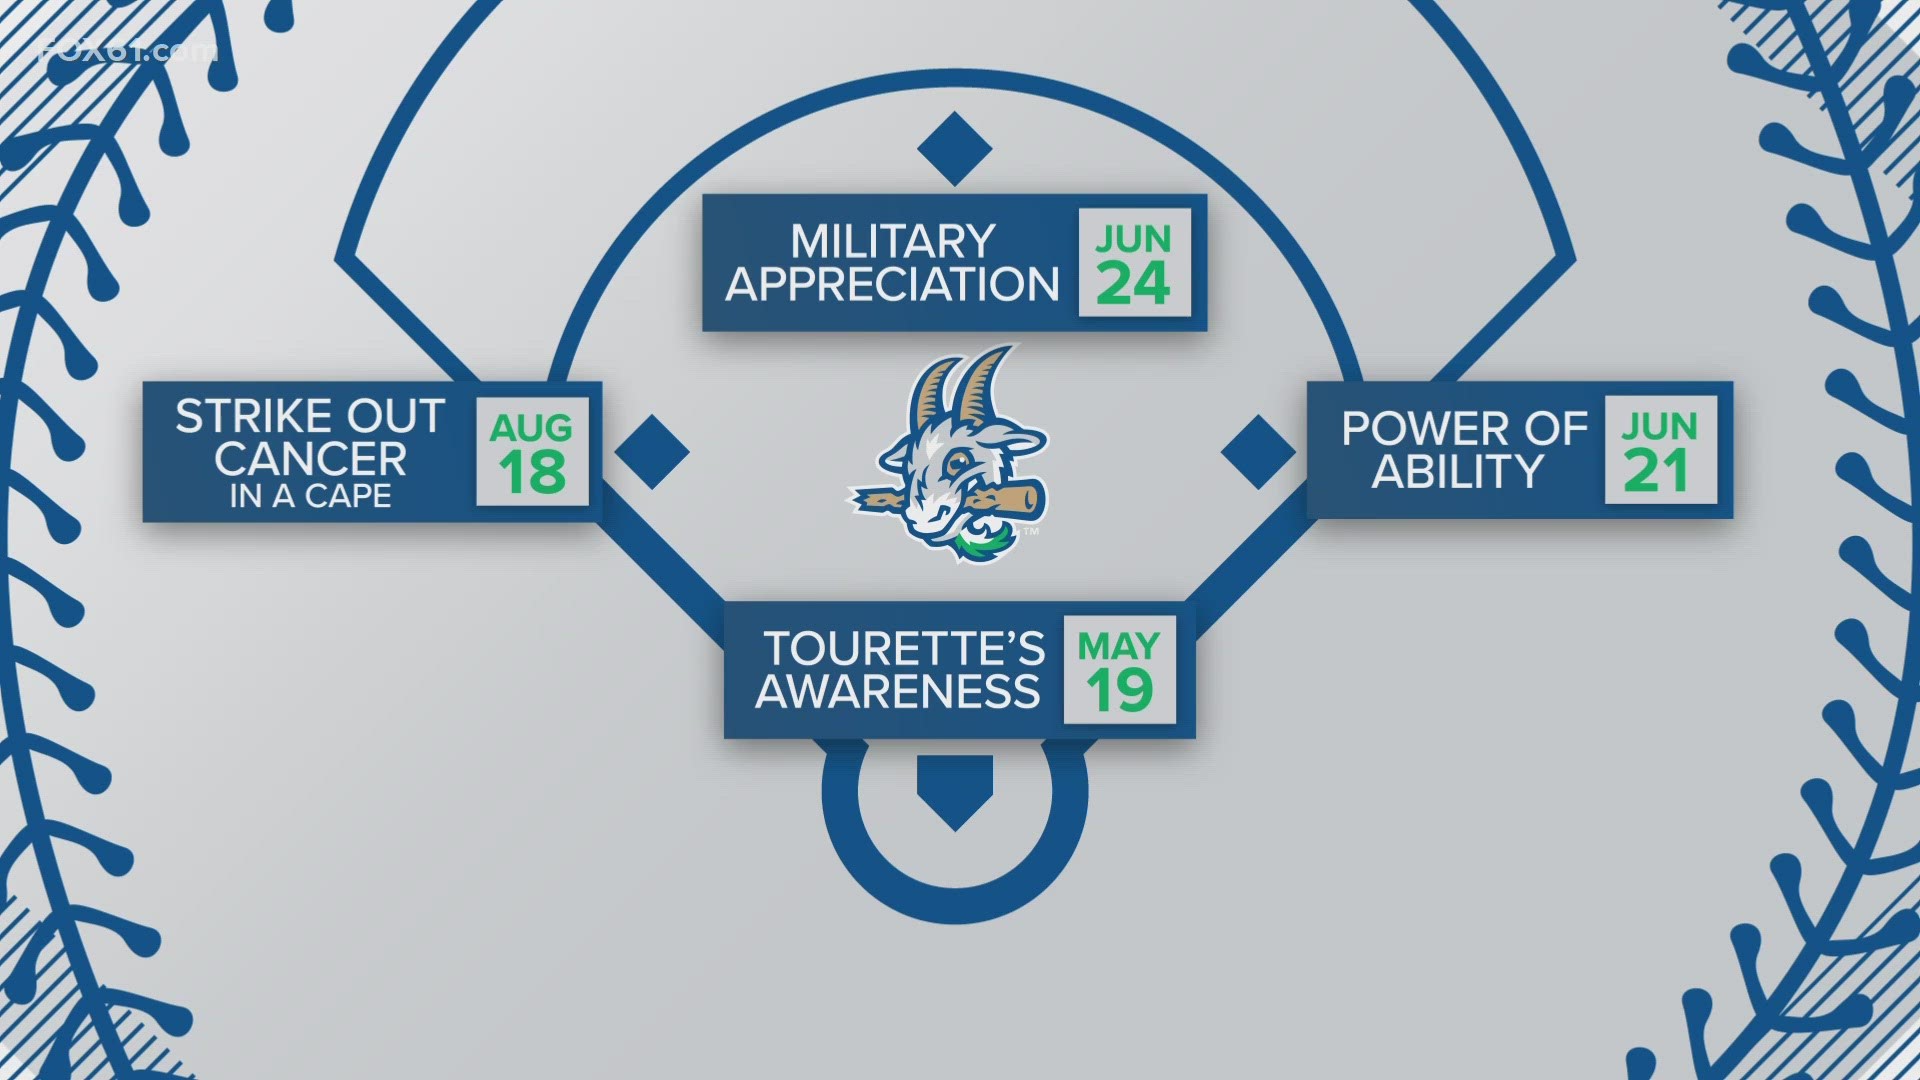 Hartford Yard Goats General Manager Mike Abramson details some of the themed game nights that will raise awareness of various causes and make a community impact.